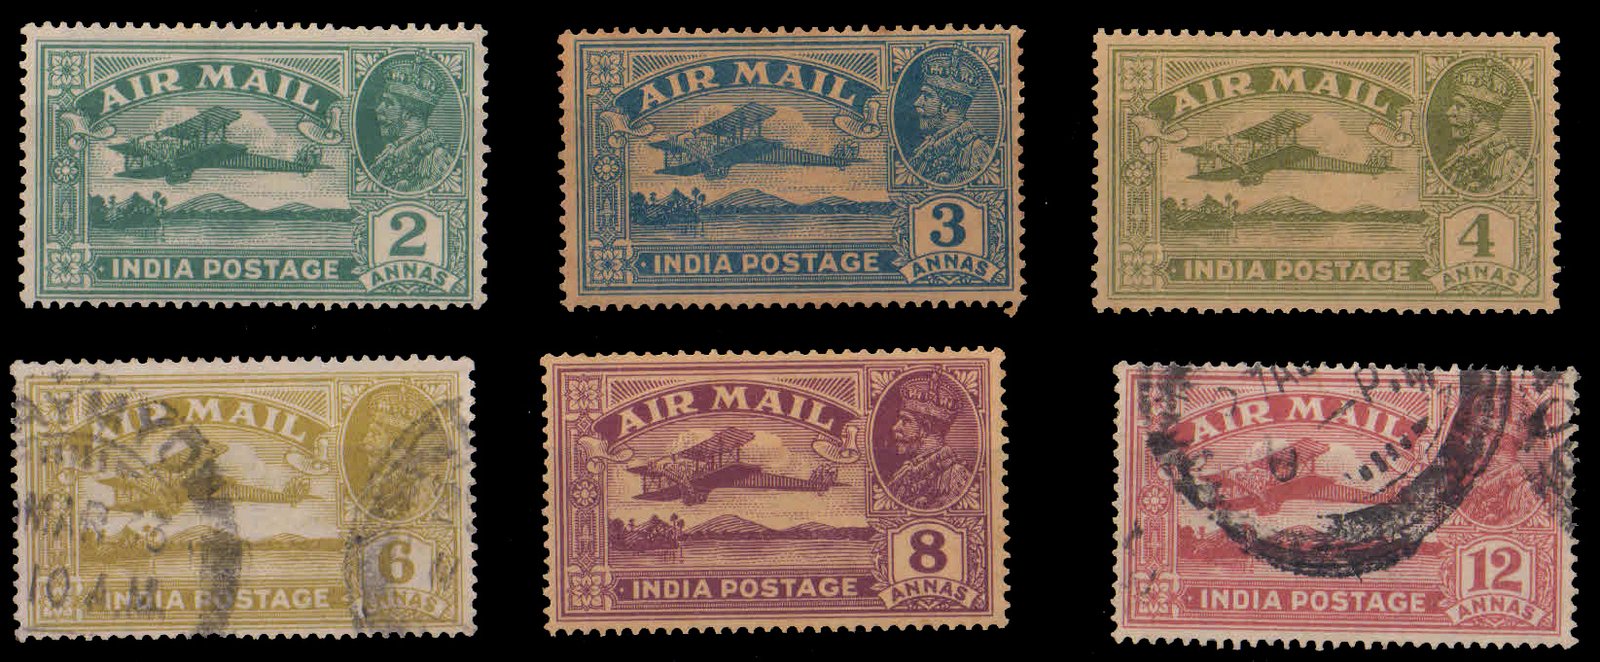 INDIA 1929-Airmail Series, Complete Set of 6, King George VI, Used as per Scan